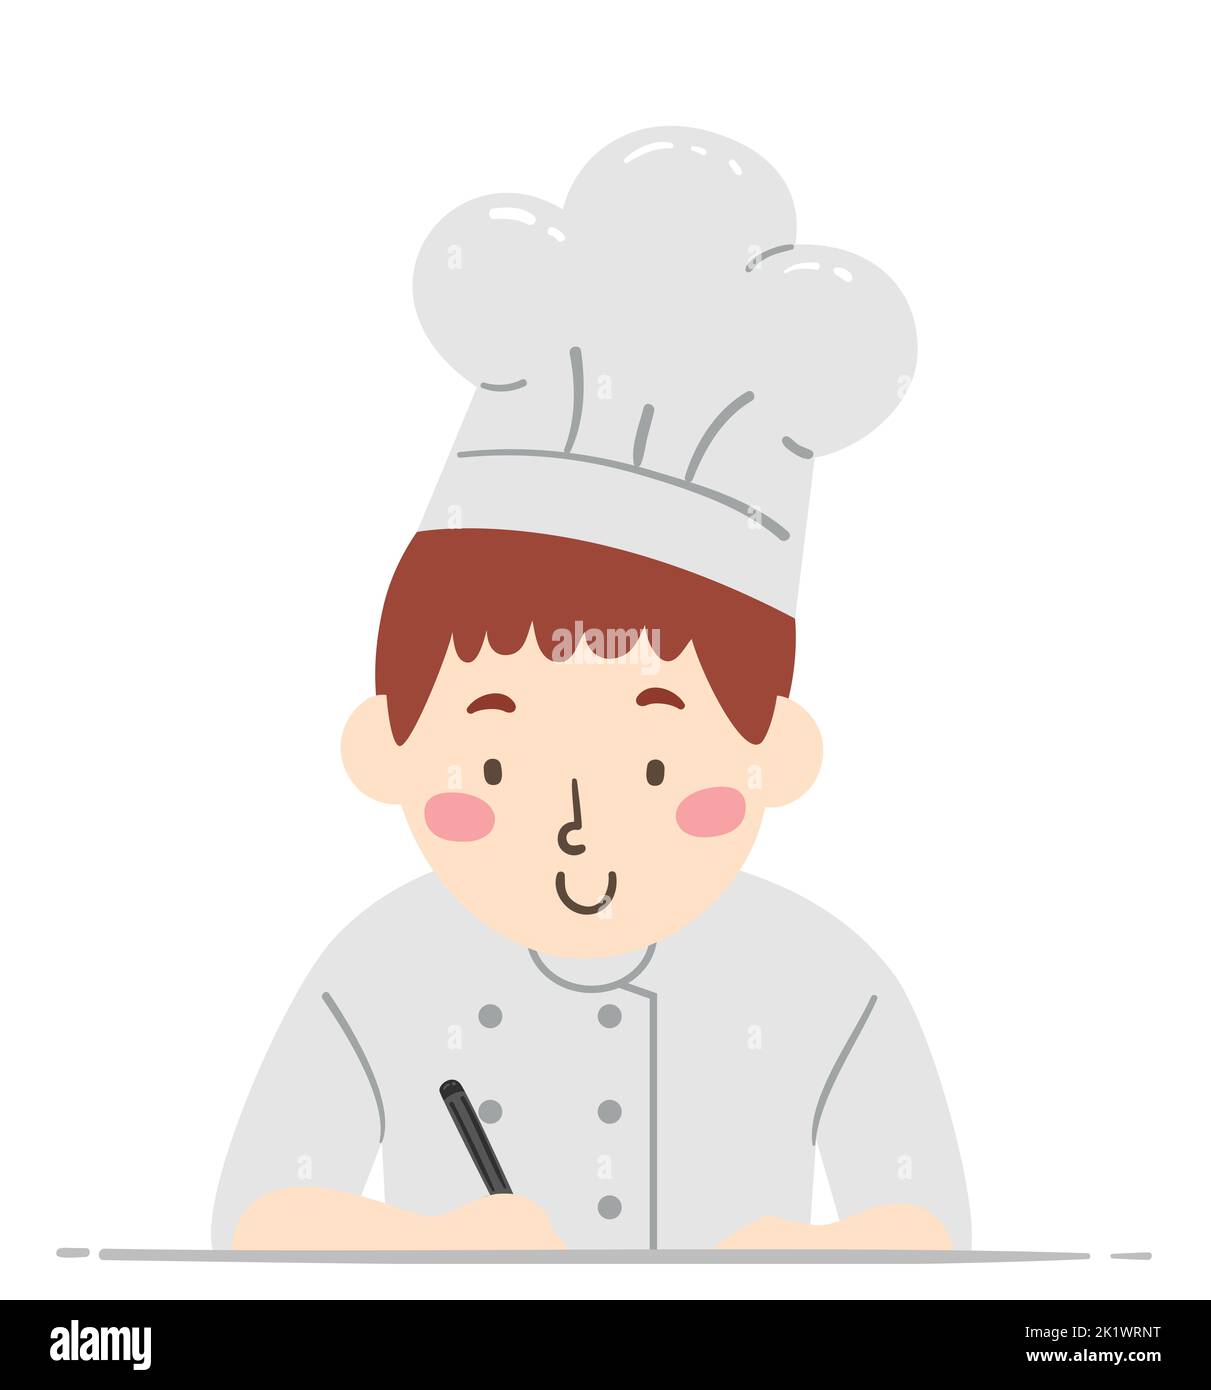 Illustration of Teen Boy Chef Wearing Coat and Toque Blanche Hat, Writing with a Pen Stock Photo